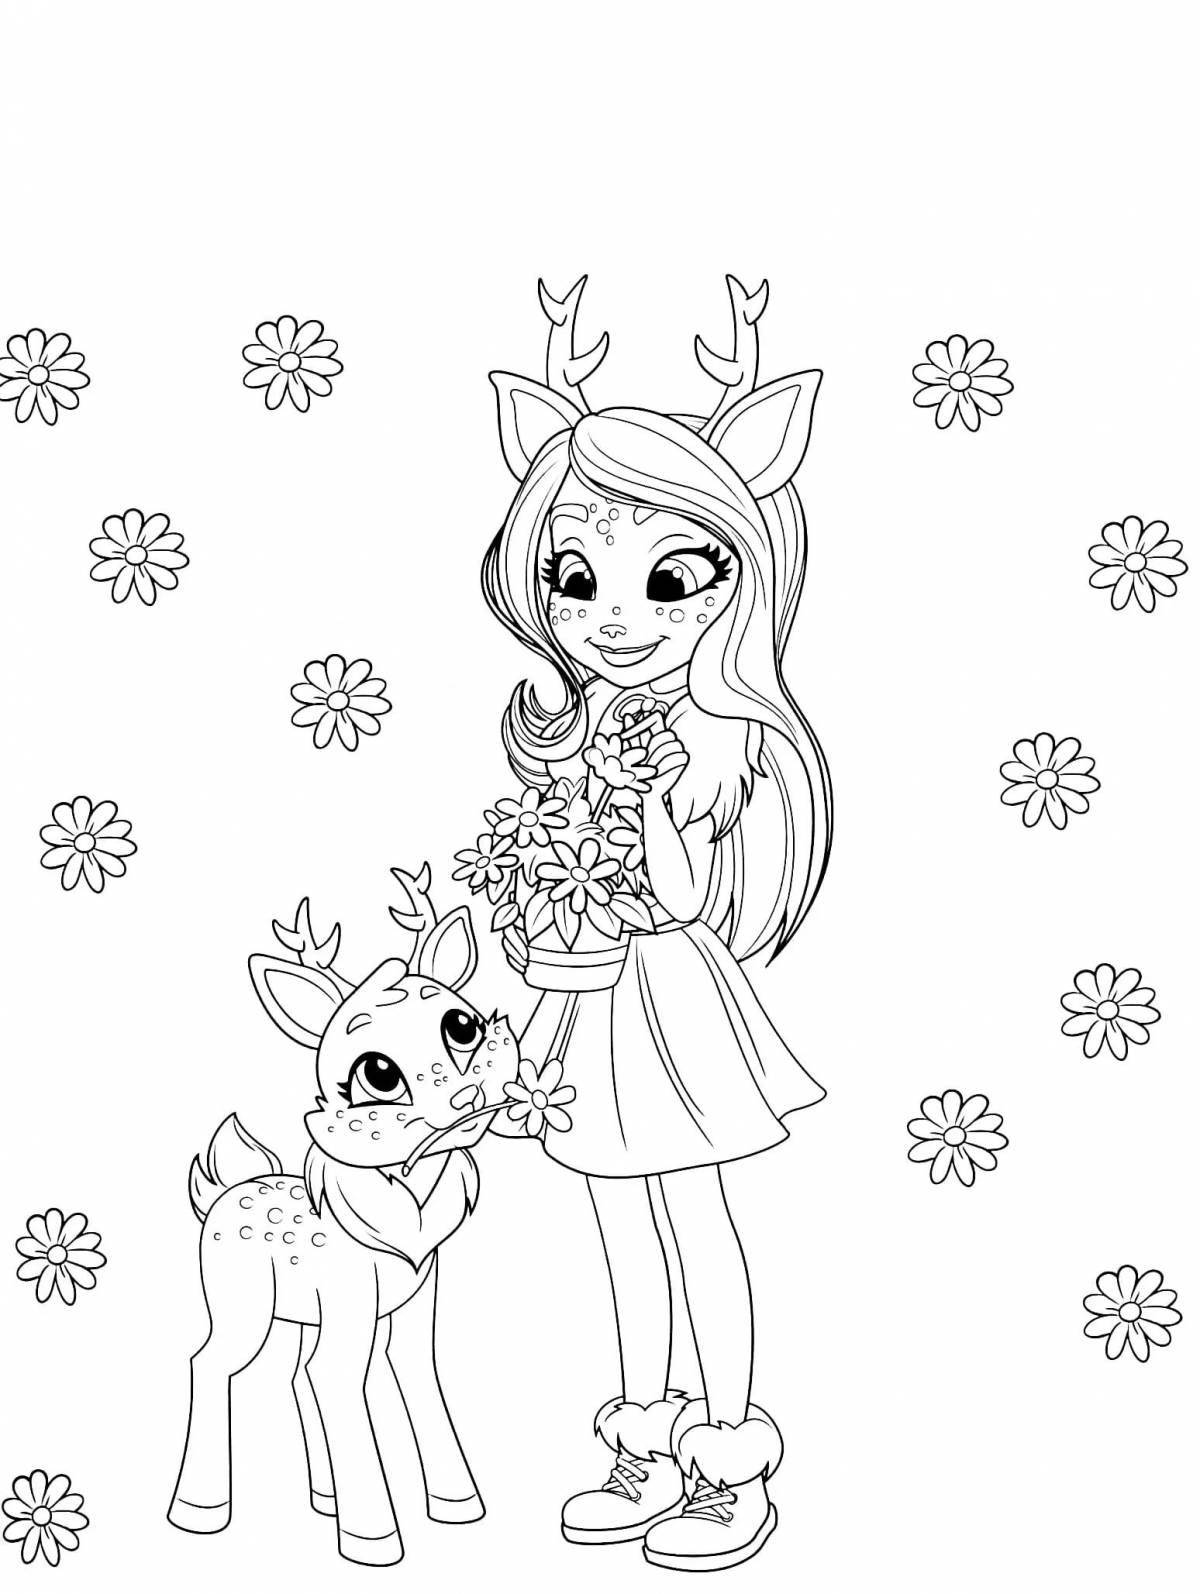 Charming felicity coloring book